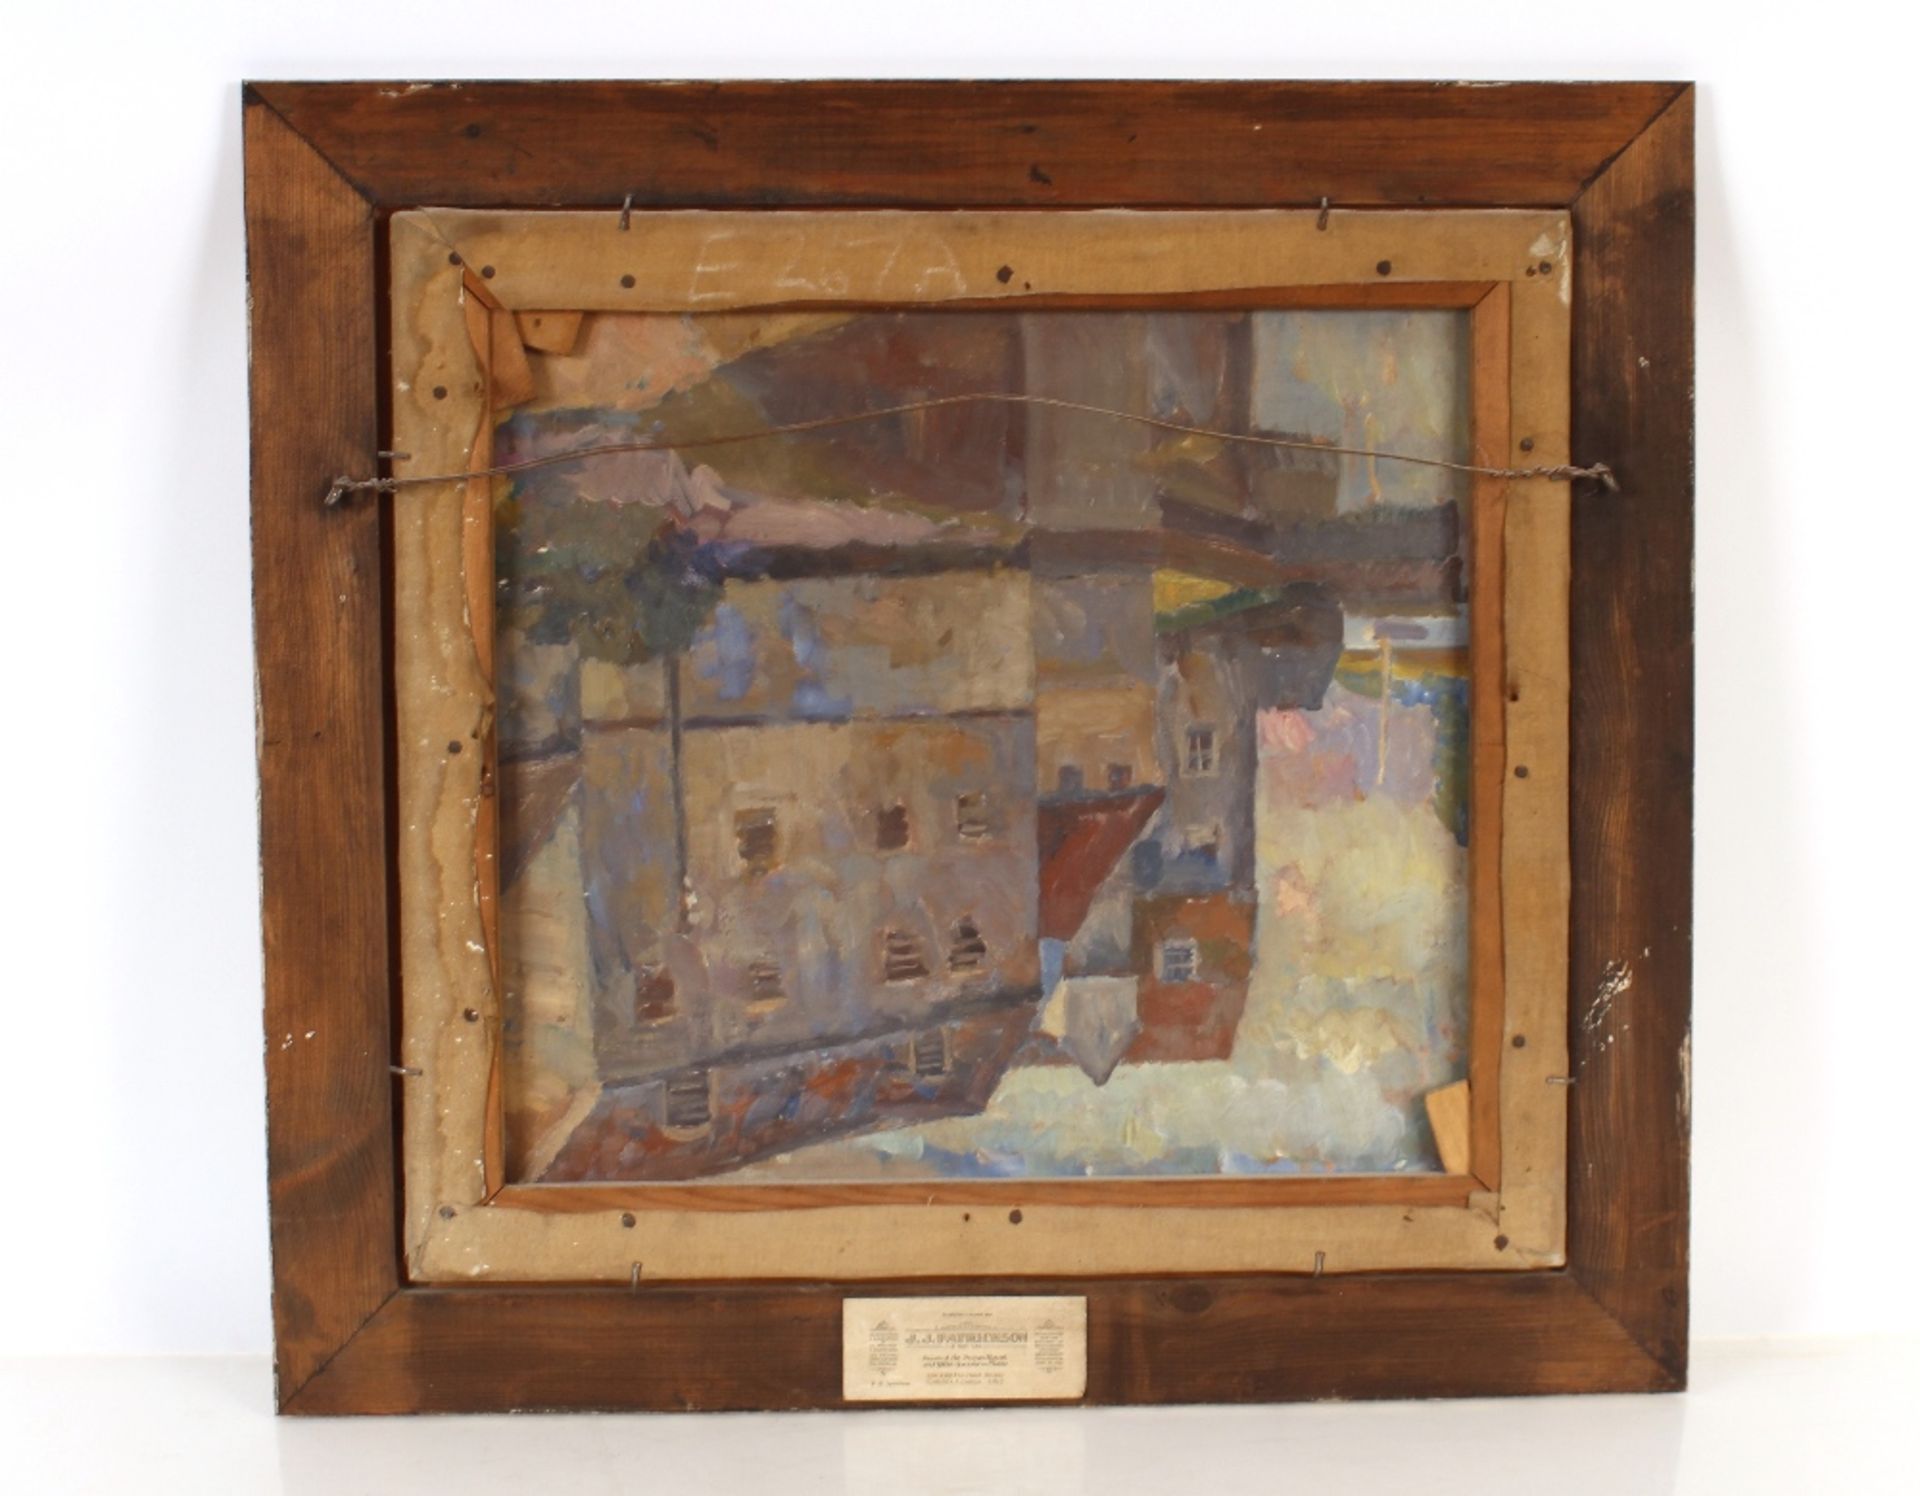 Attributed to Allan Walton, study off lowers and fruit on a window ledge, unsigned oil on canvas, - Image 3 of 4